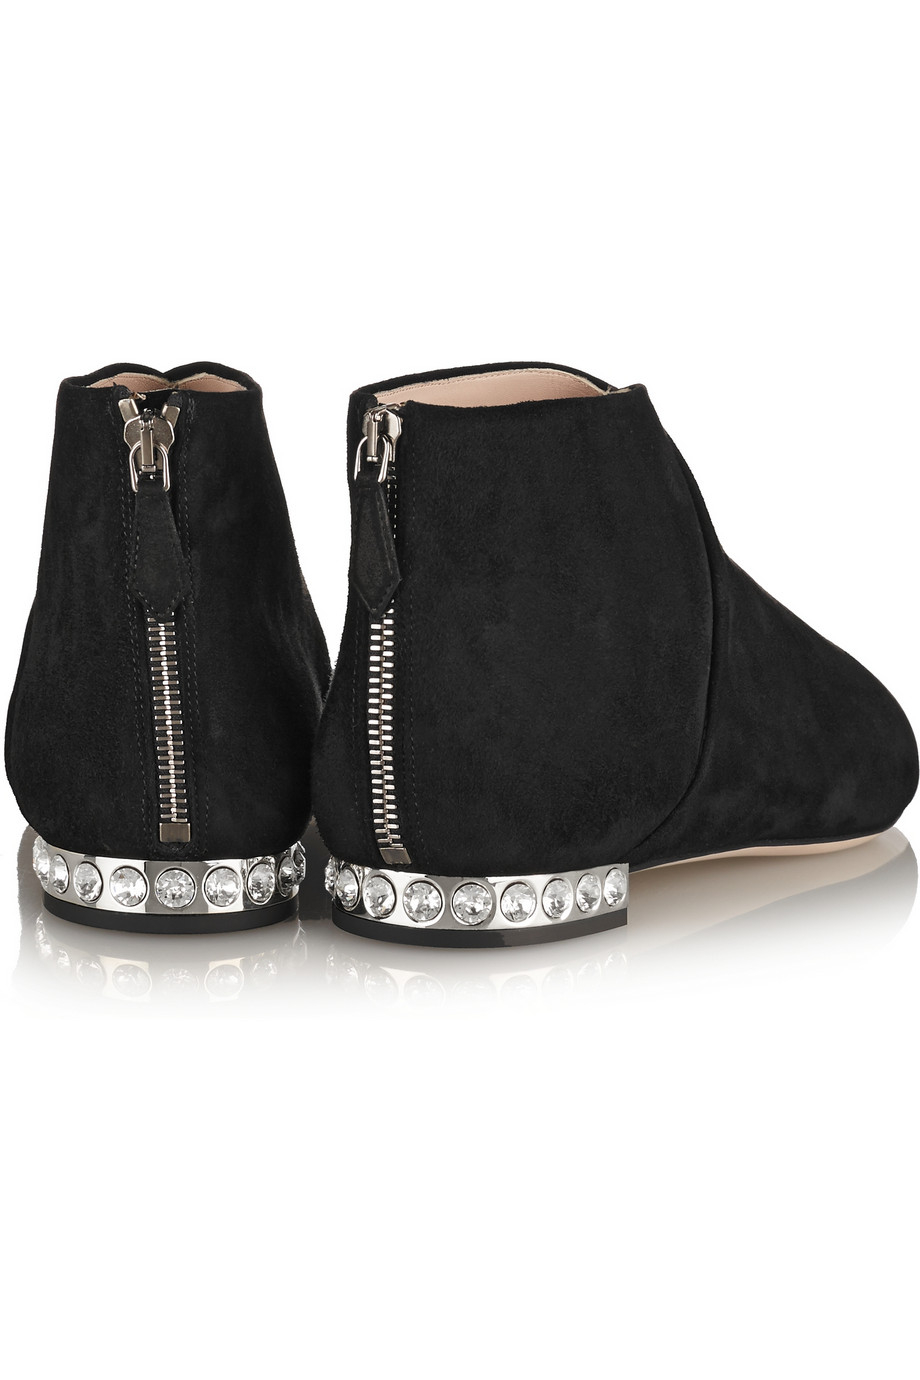 Miu Crystal-embellished Suede Ankle Boots in Black Lyst